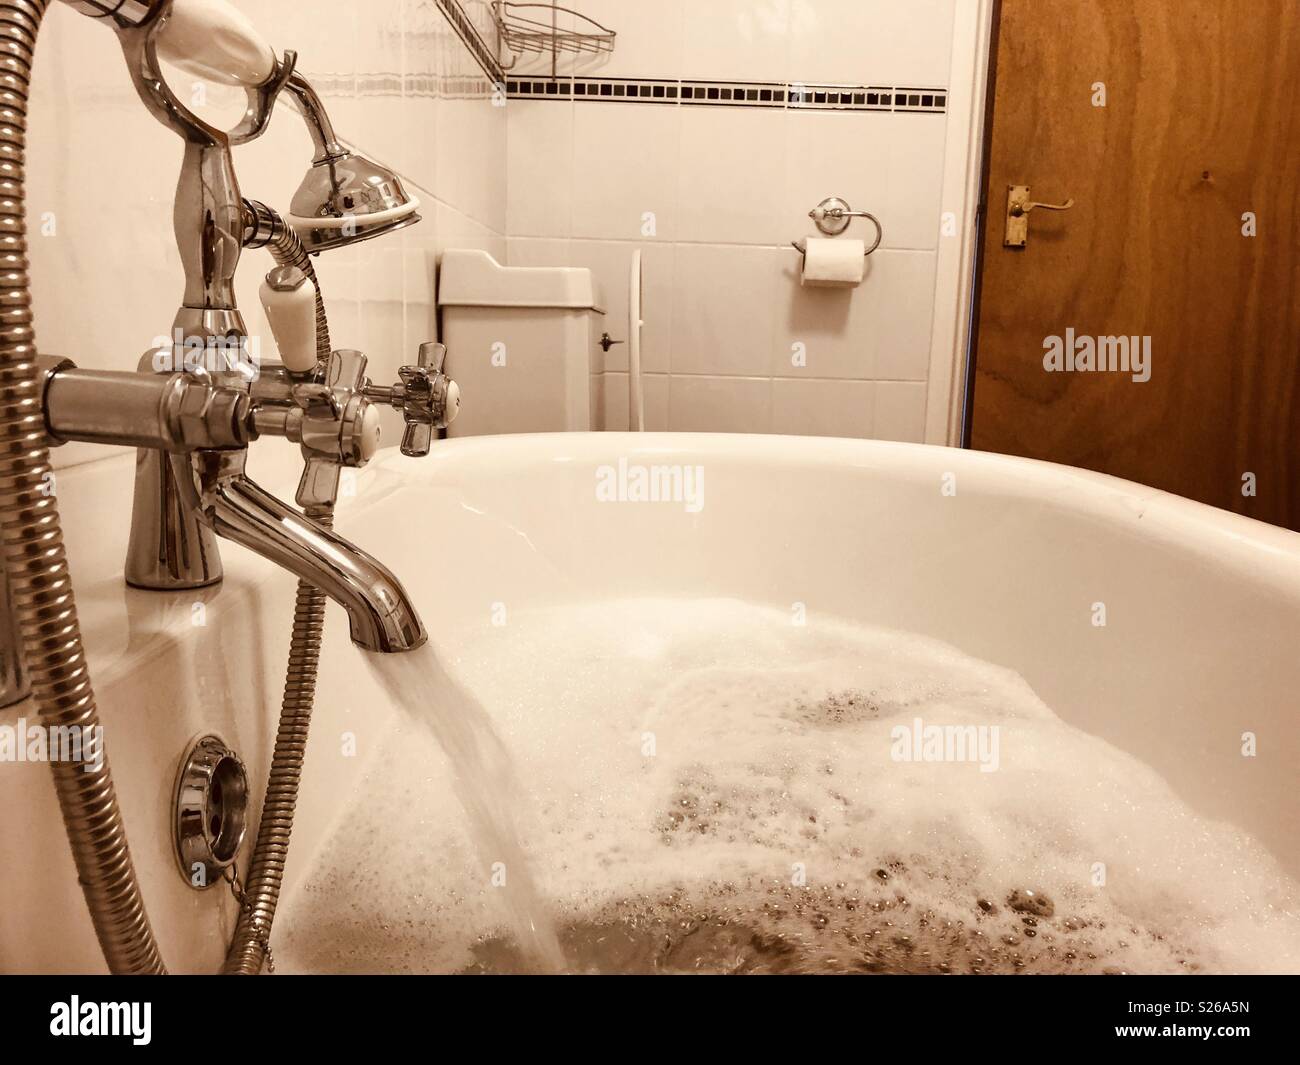 Water pouring from a tap into a bath tub Stock Photo